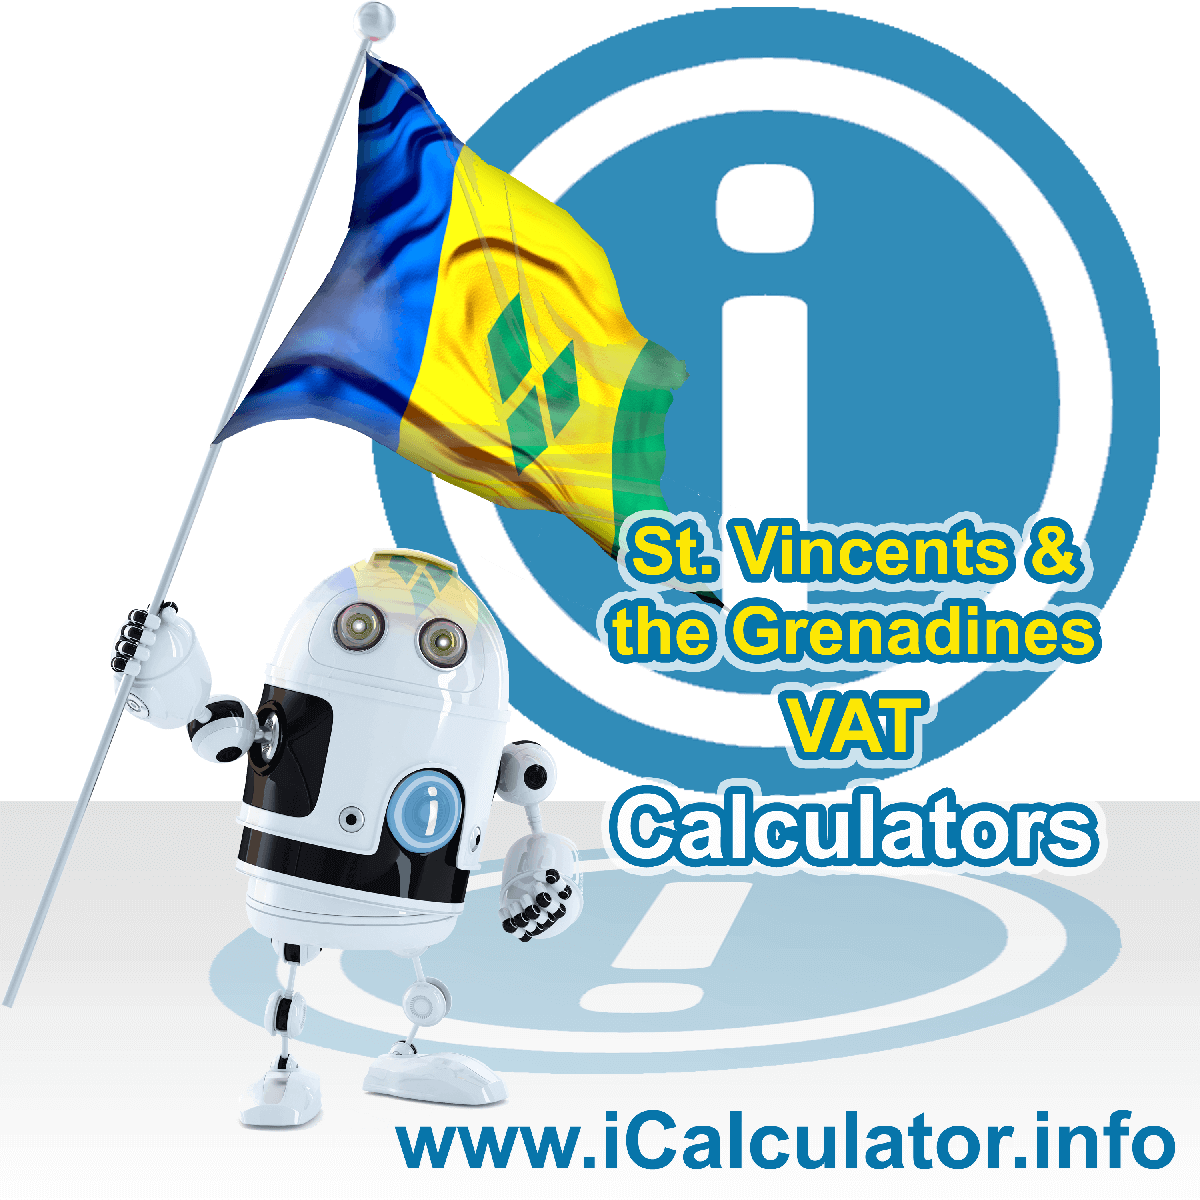 Saint Vincent And The Grenadines VAT Calculator. This image shows the Saint Vincent And The Grenadines flag and information relating to the VAT formula used for calculating Value Added Tax in Saint Vincent And The Grenadines using the Saint Vincent And The Grenadines VAT Calculator in 2023